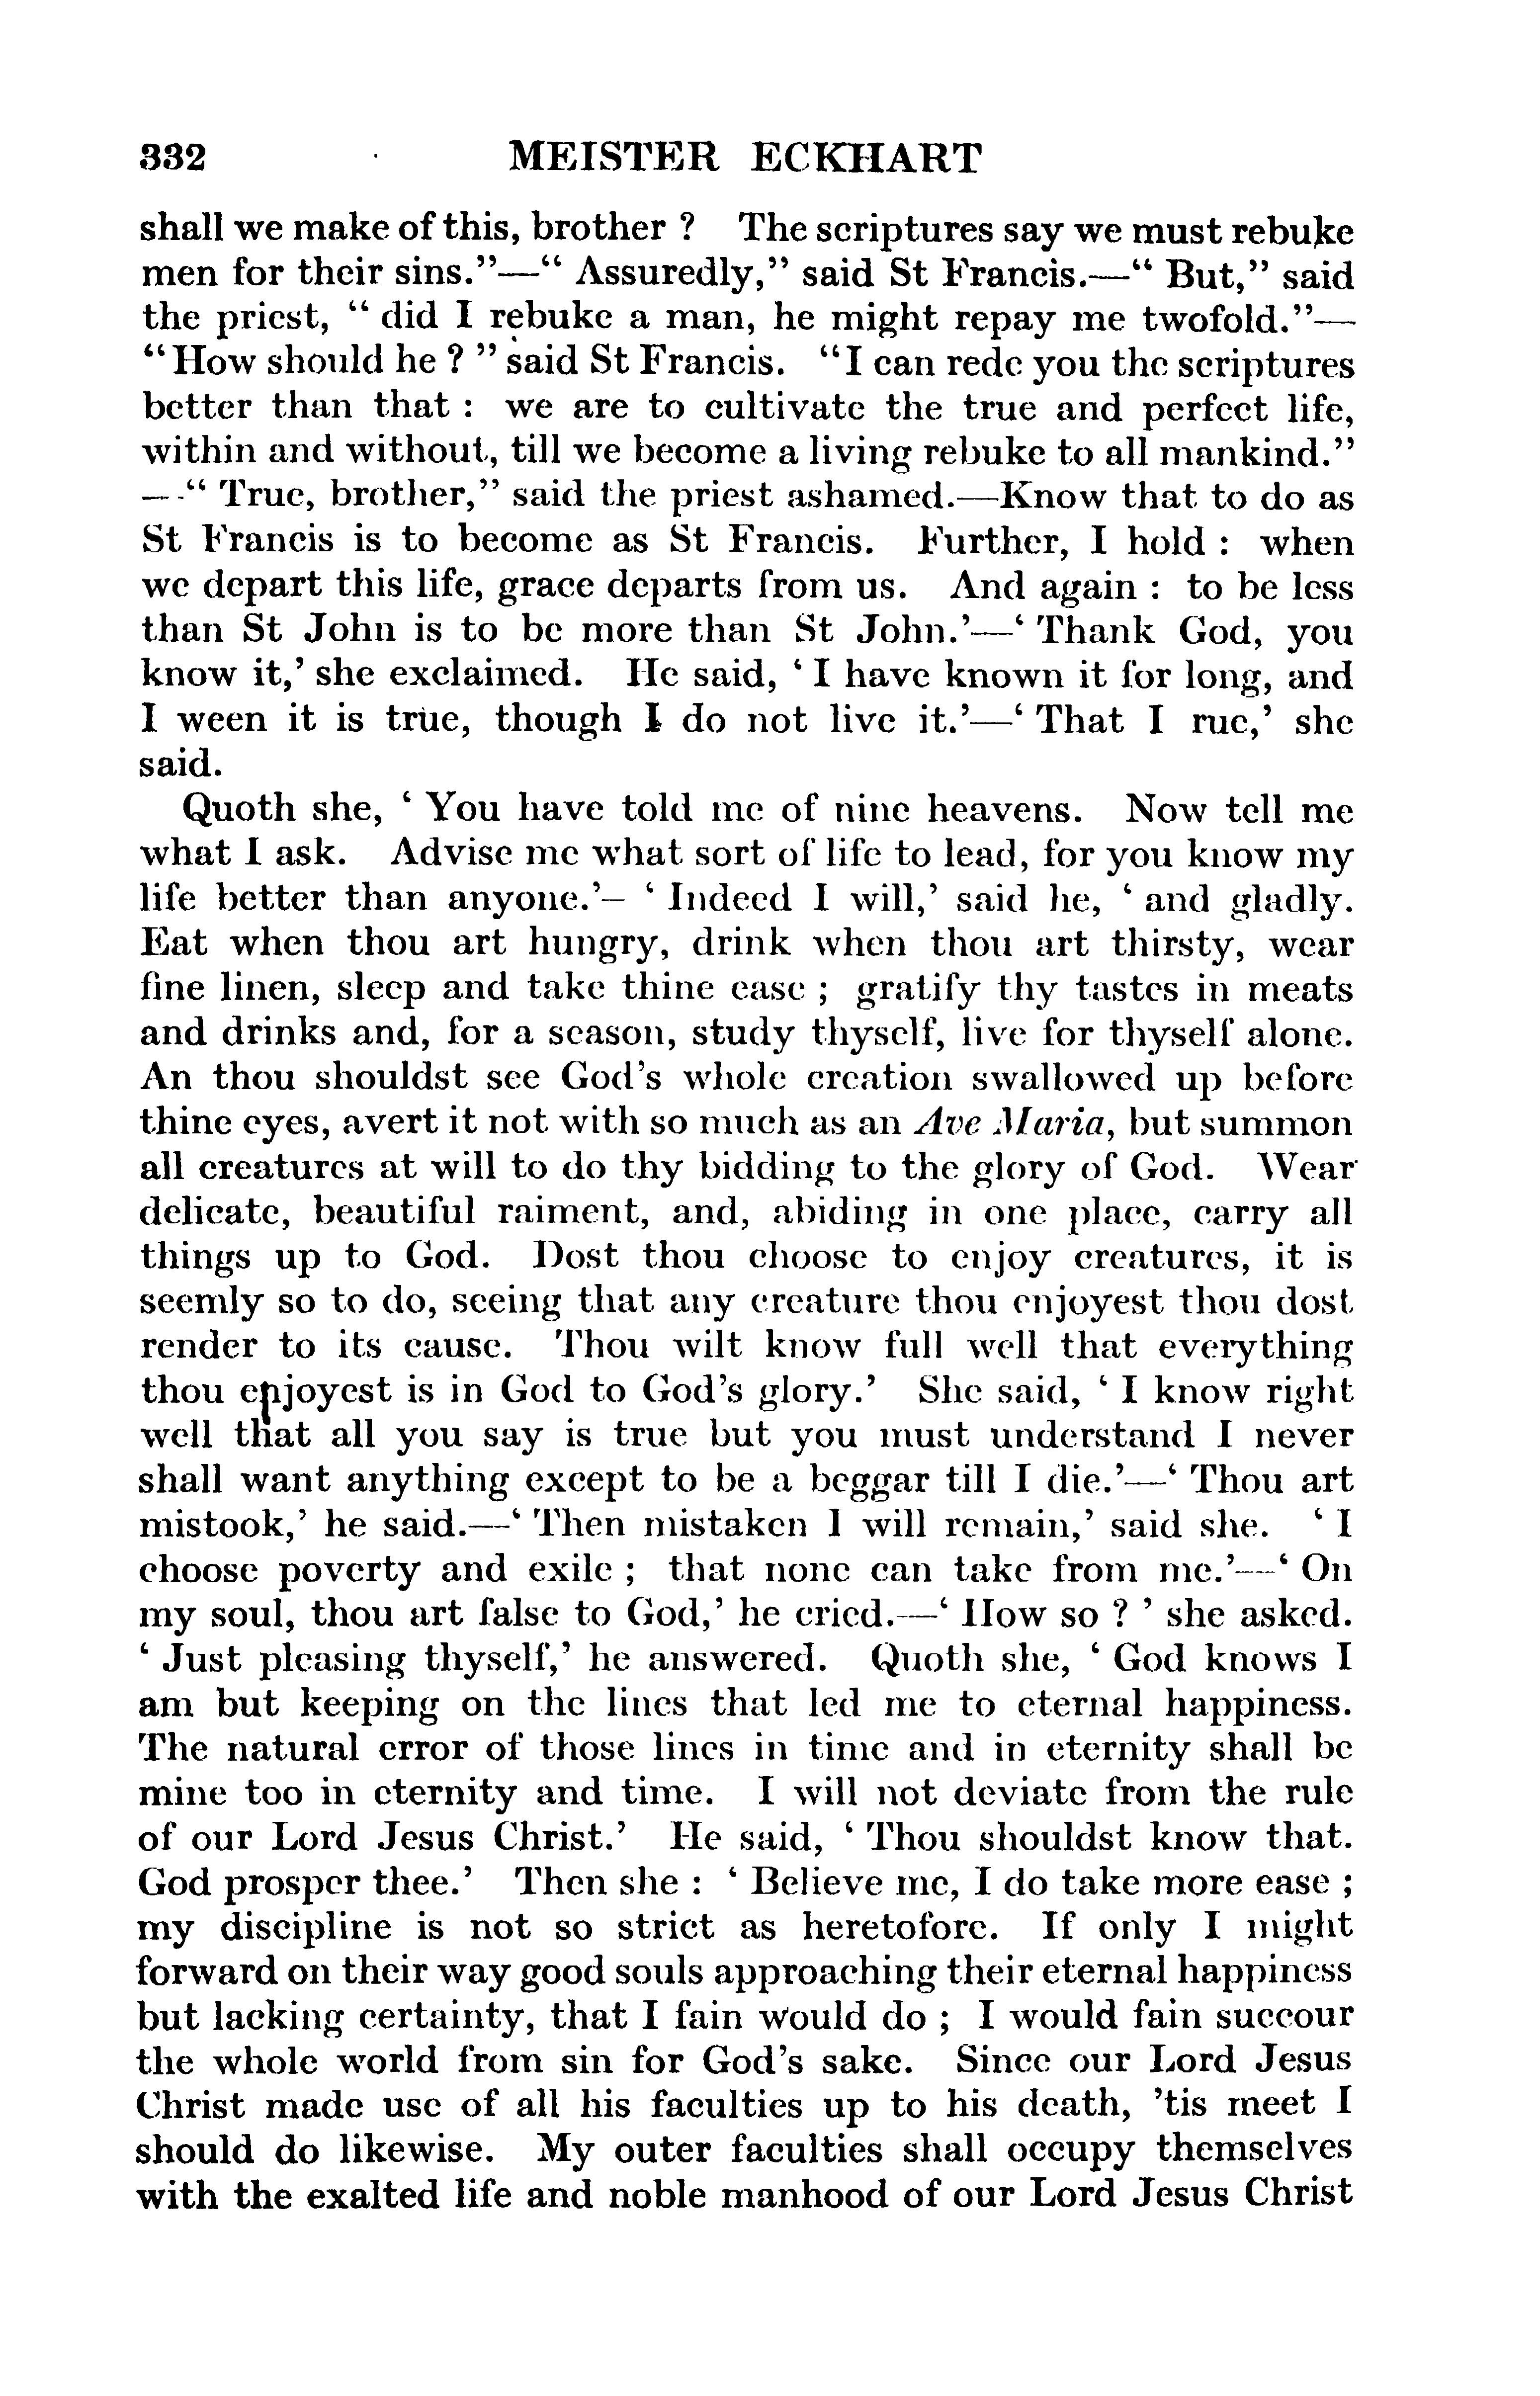 Image of page 0356